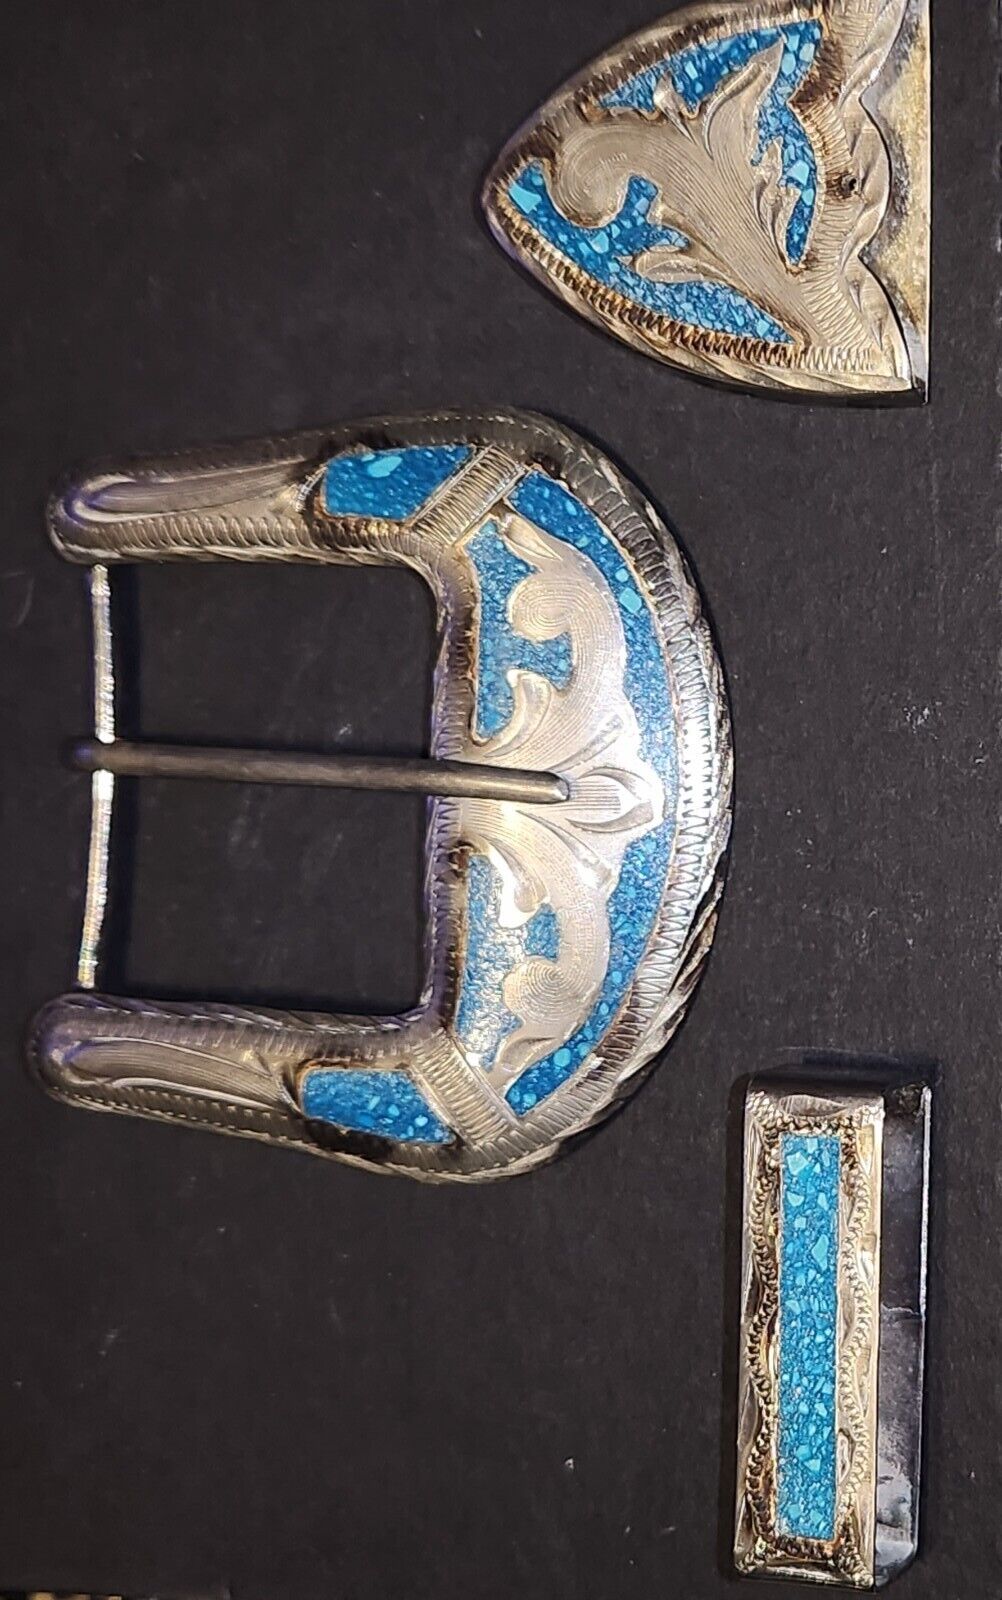  Turquoise 3 Pcs. Chip Inlay silver Tone  WESTERN Belt Buckle